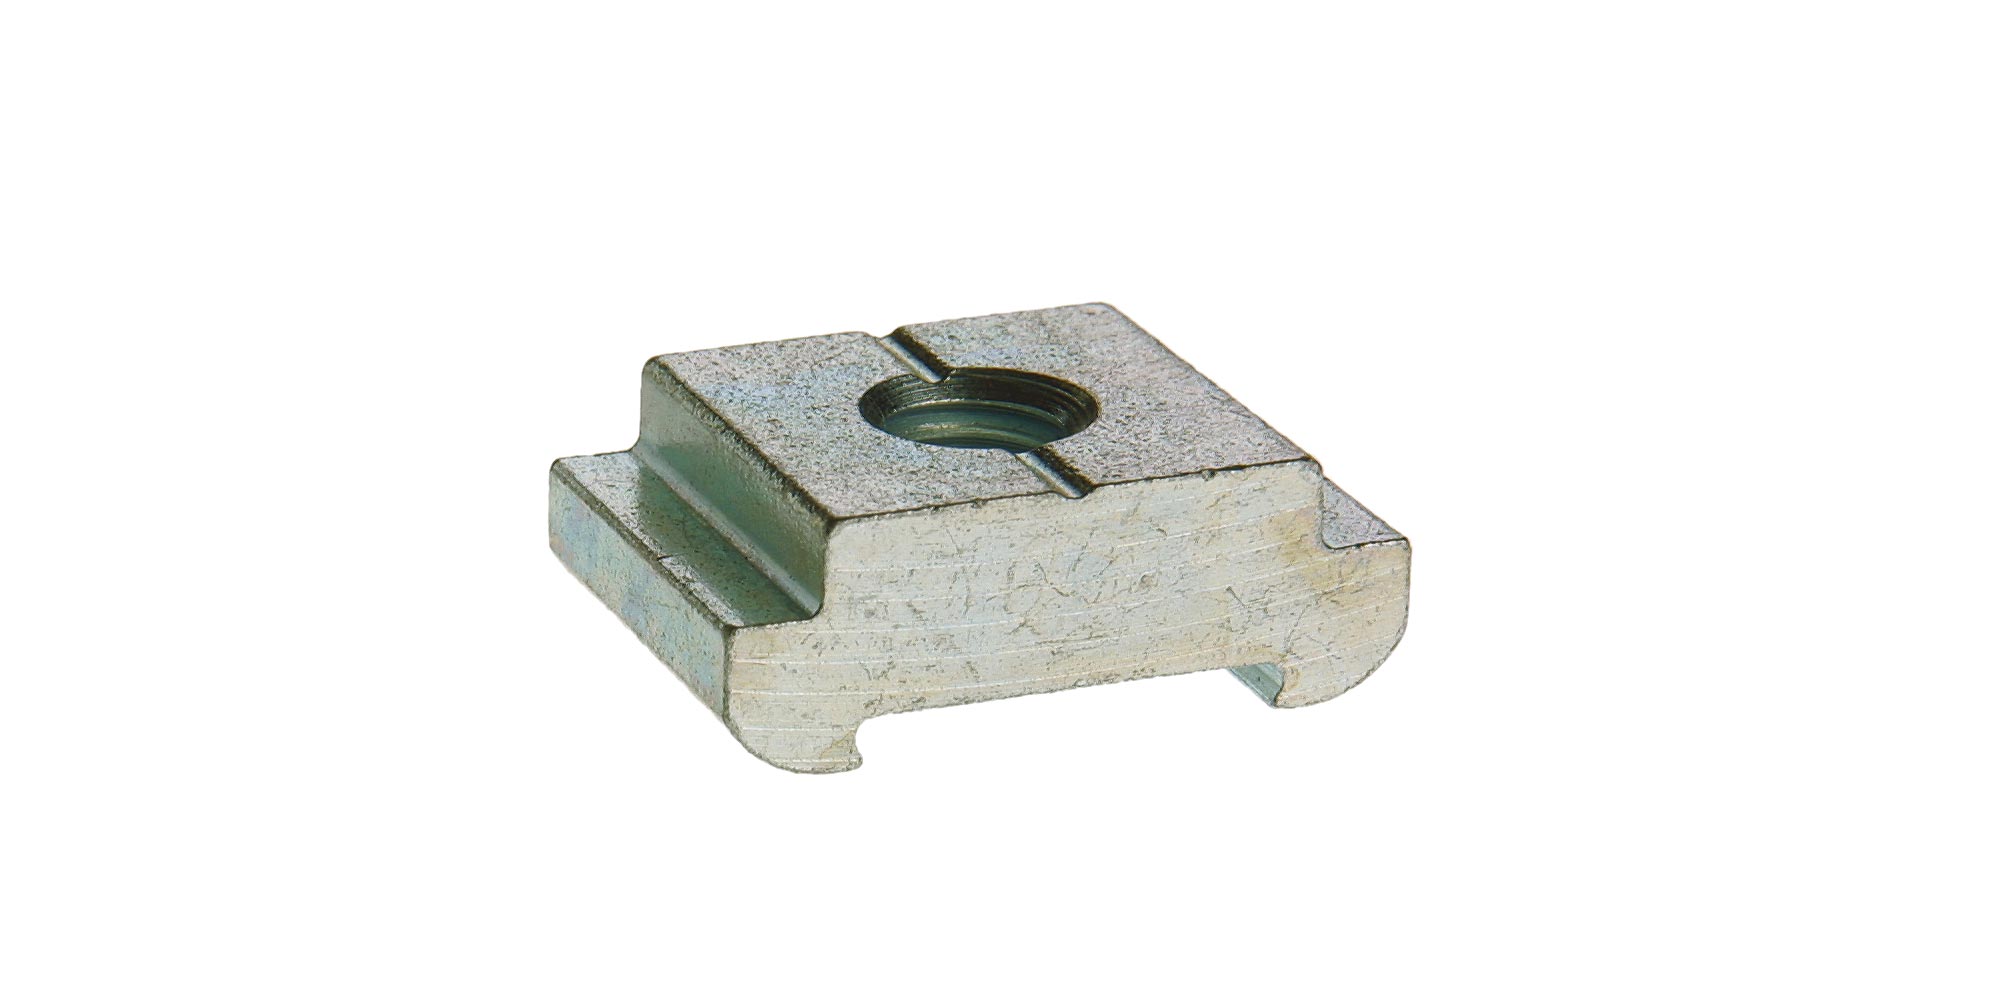 Sliding blocks C30 M5 galvanized steel, without screw, without spring